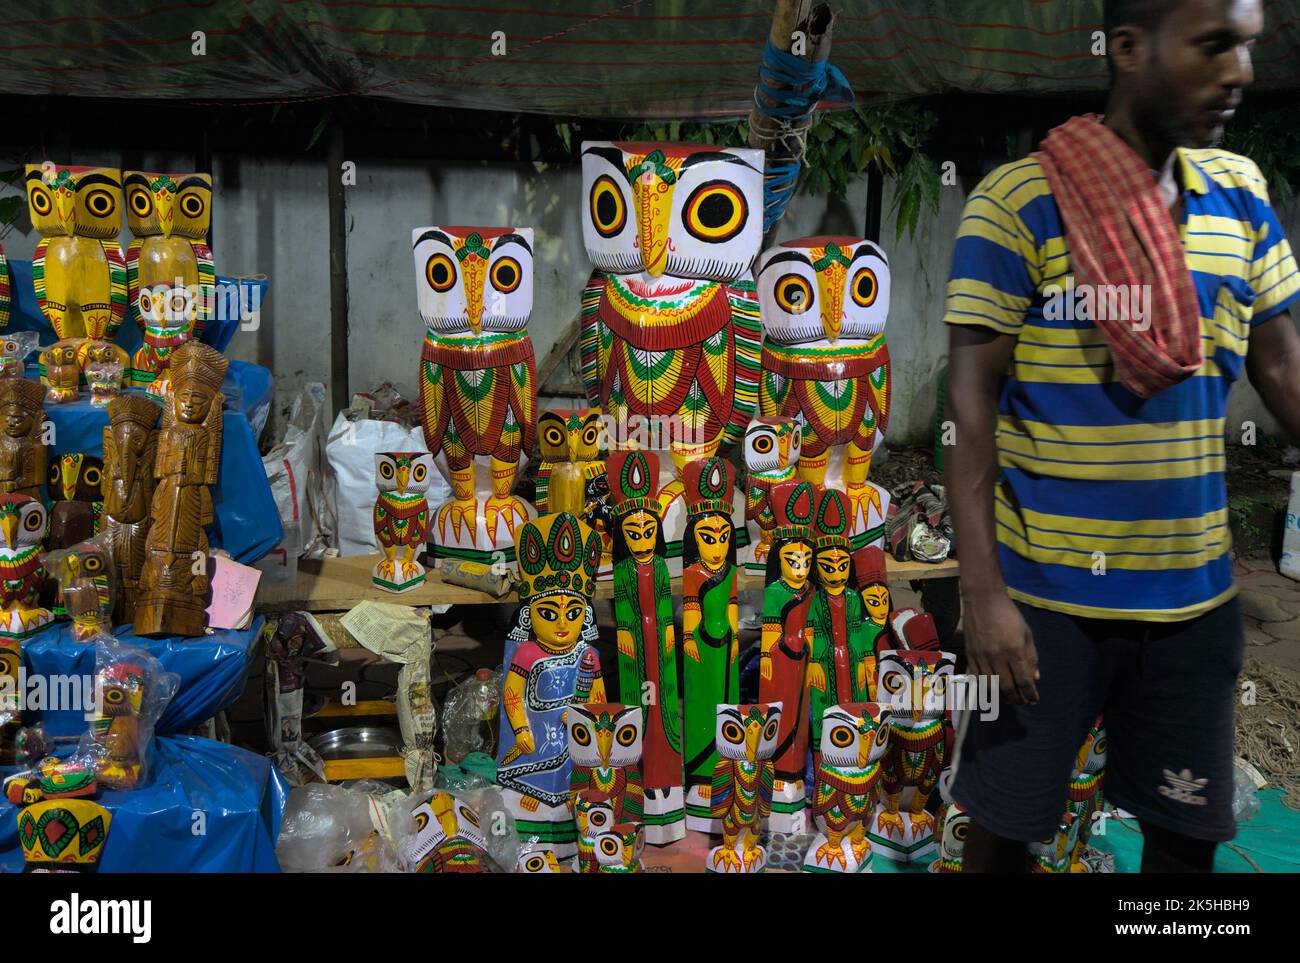 Roadside seller selling decorative items in temporary pavement stalls Stock Photo